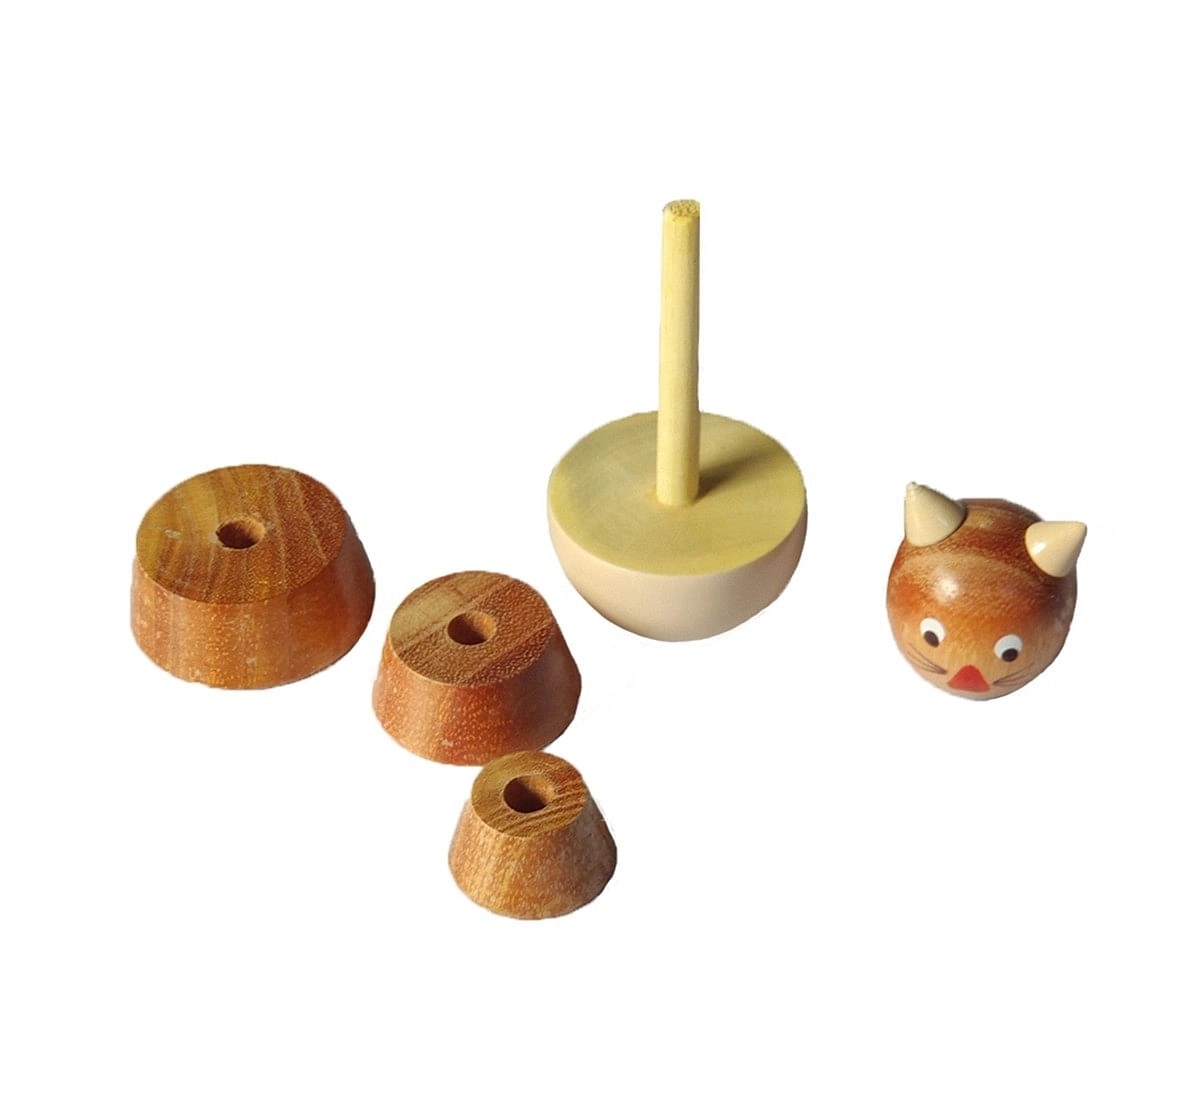 Nurture India Wooden Cat Counting Set Wooden Toys for Kids age 12M+ 